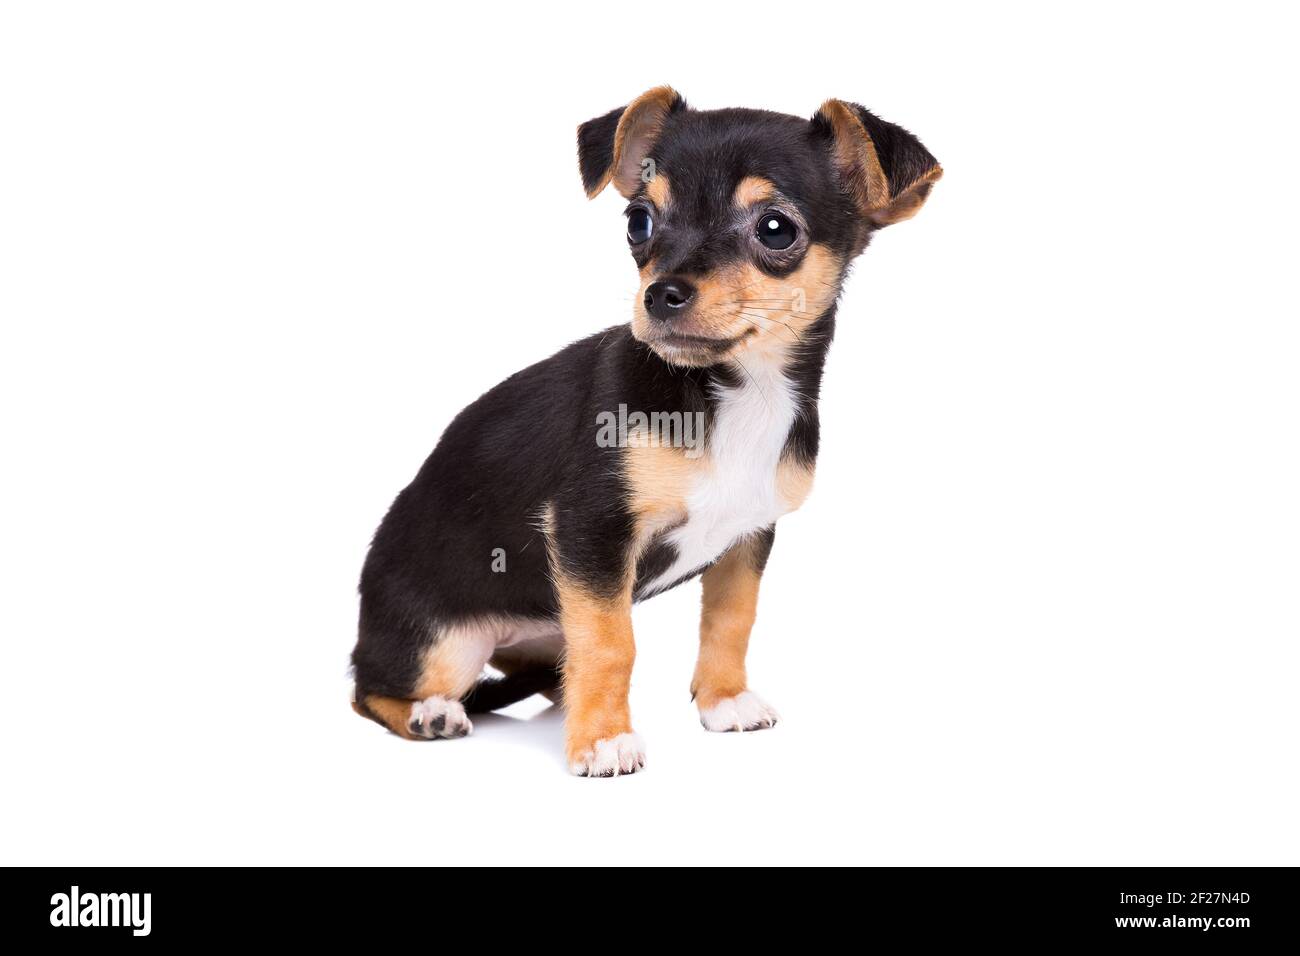 Short haired chihuahua puppy Stock Photo - Alamy